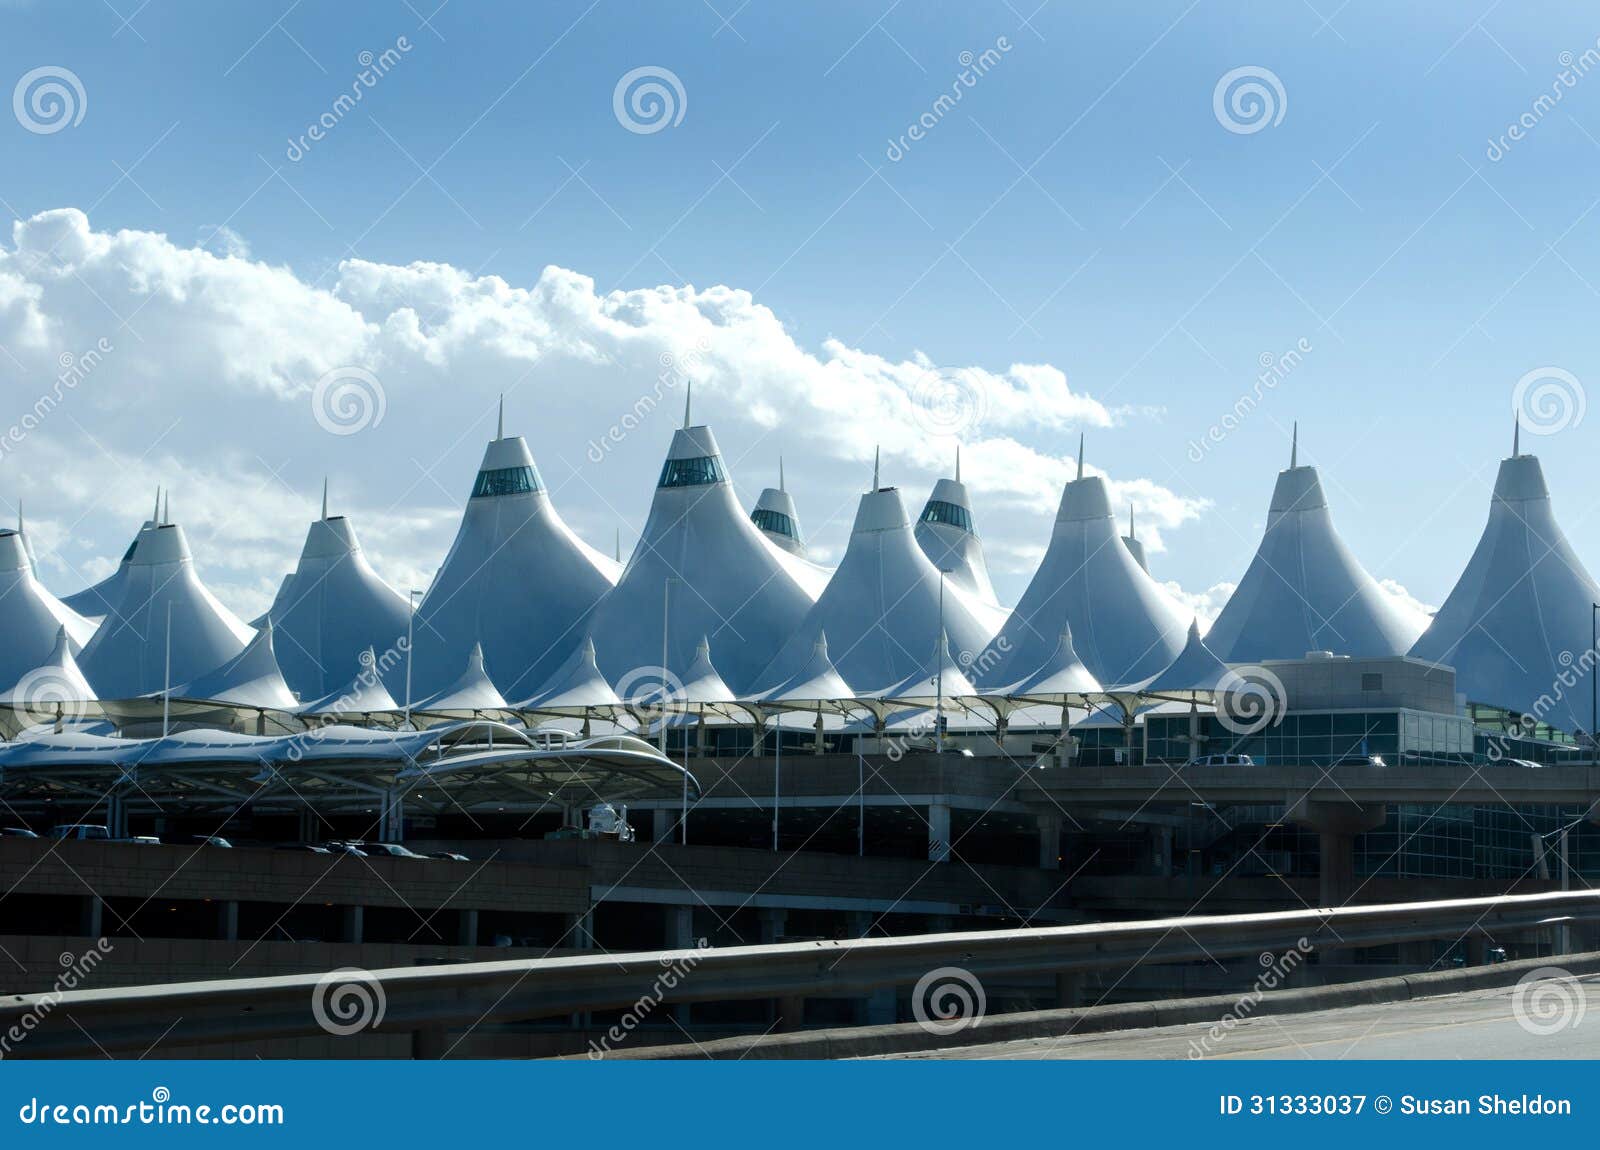 Denver airport looks like an exotic tent city, as seen from the ...